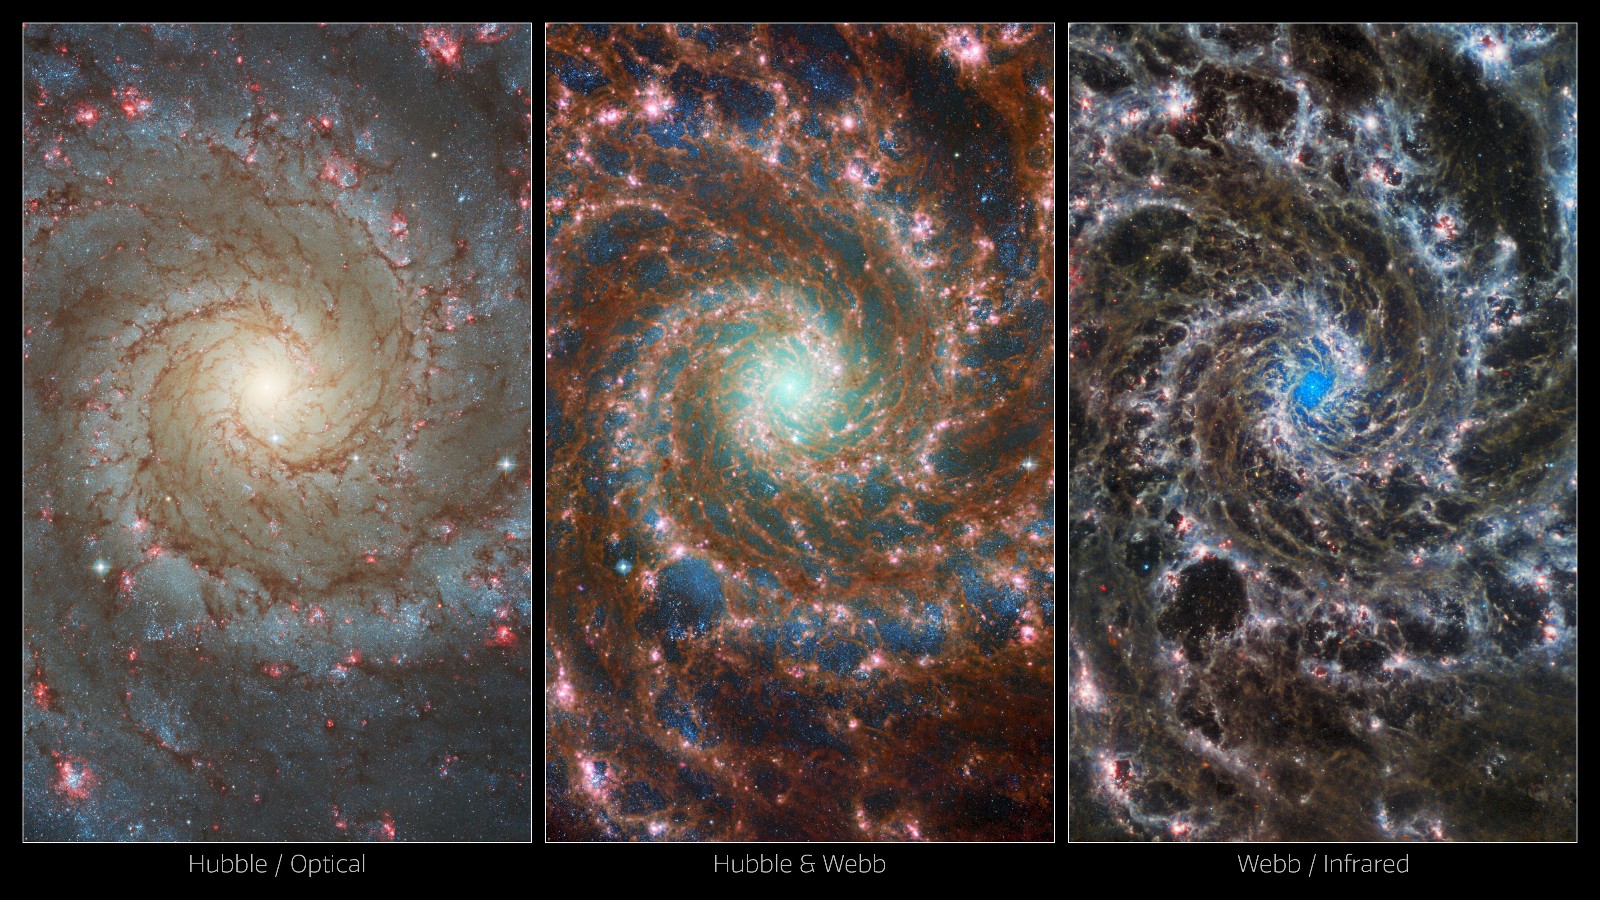 Webb and Hubble telescopes join forces to capture multi-spectrum image of Phantom Galaxy